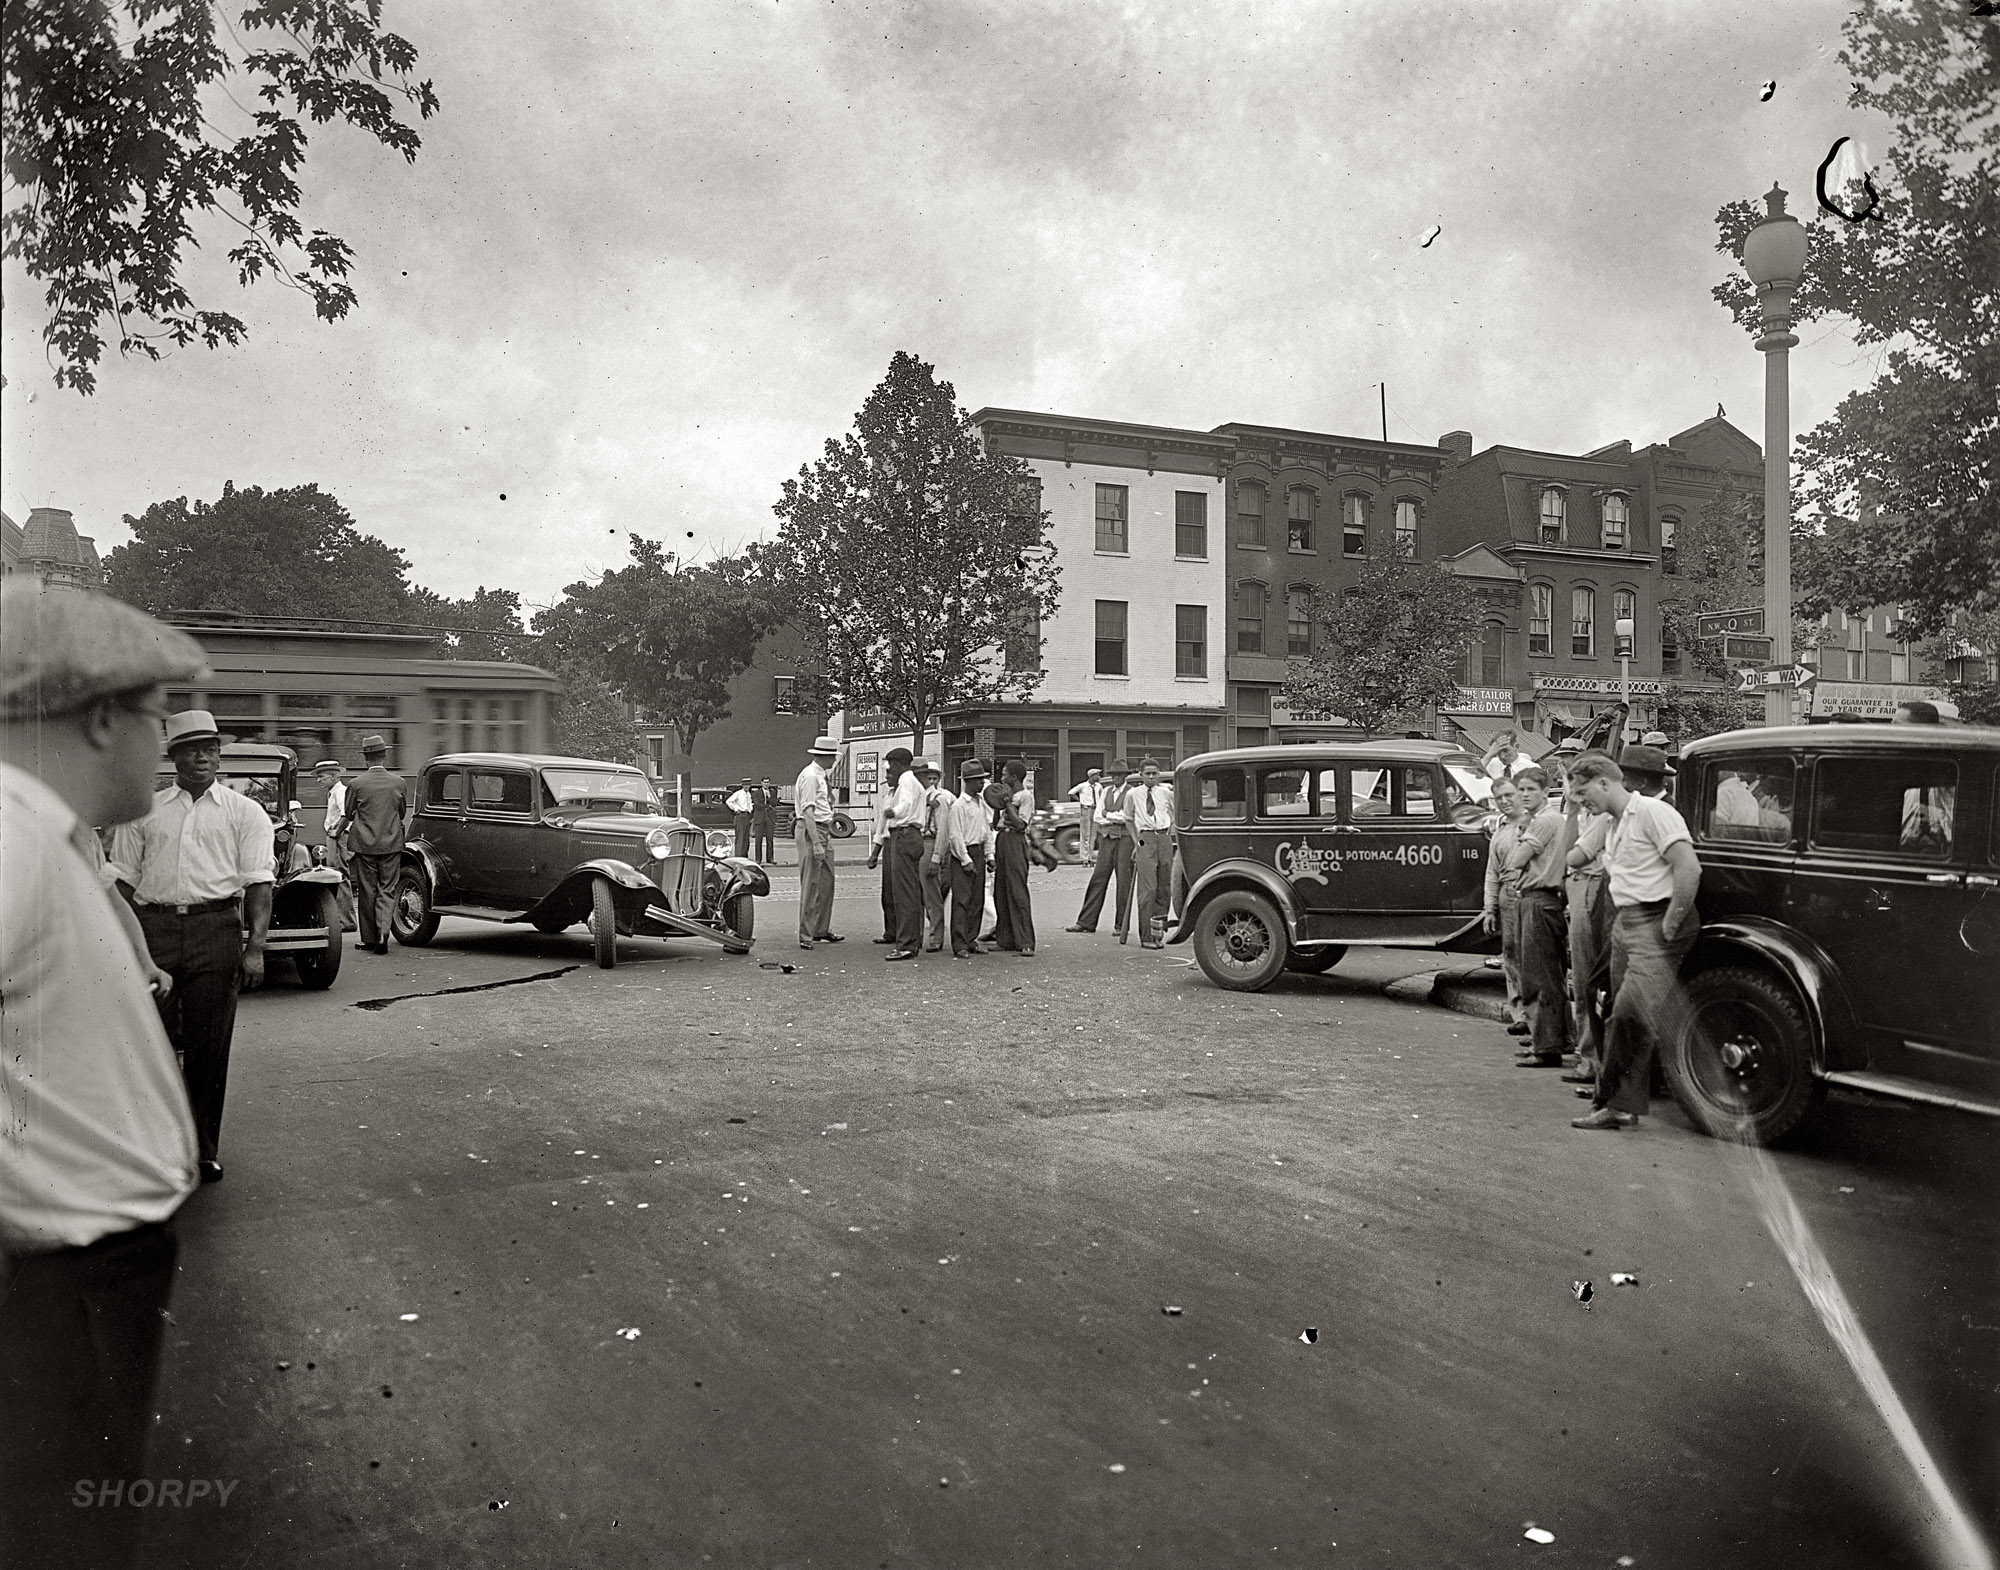 "Street scene, auto accident, 14th and Q." A second look at this Washington, D.C., car crash circa 1932. National Photo Co. safety film negative. View full size.